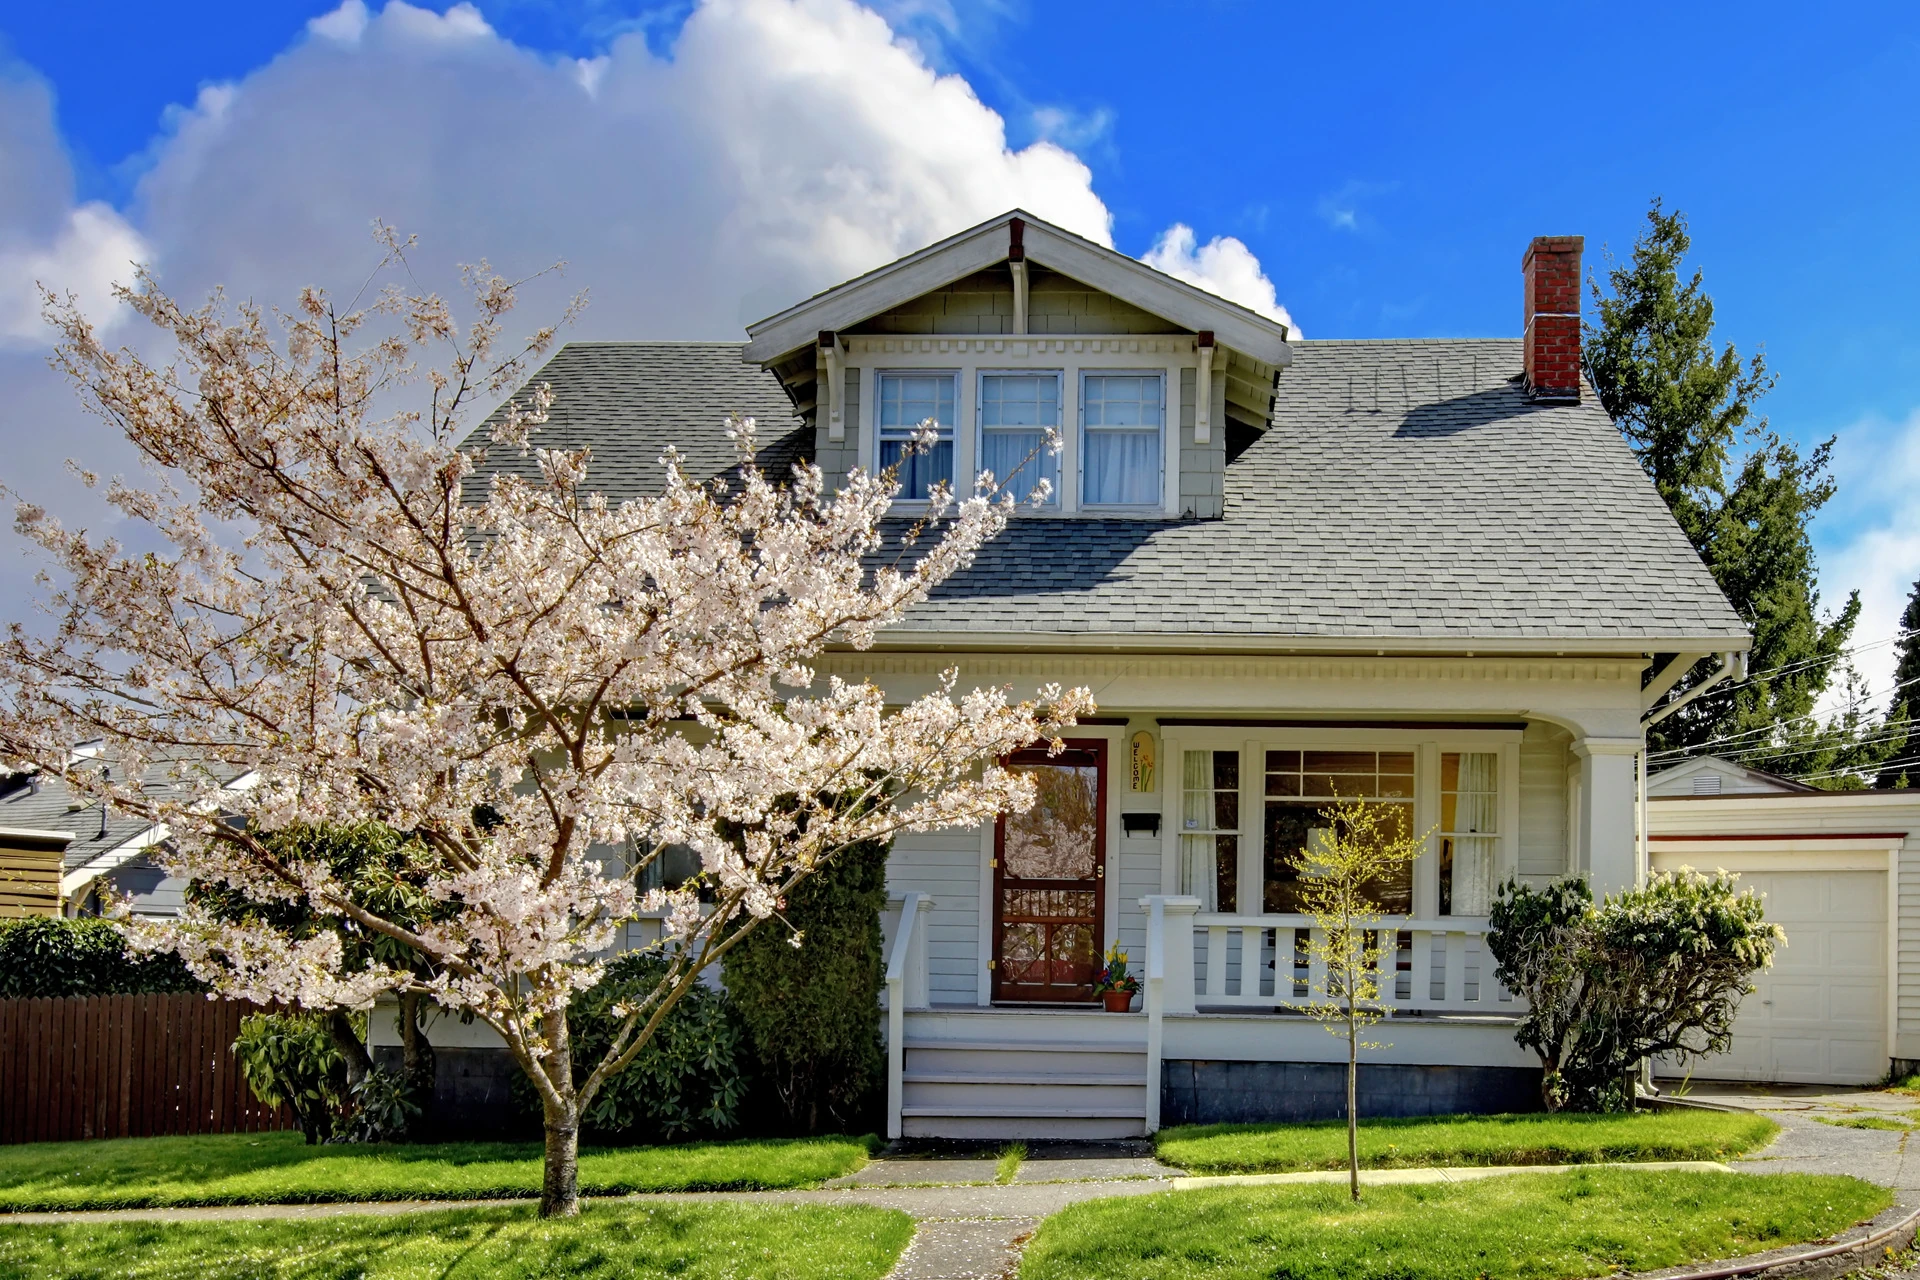 Quaint old house with a cherry blossom tree in front.